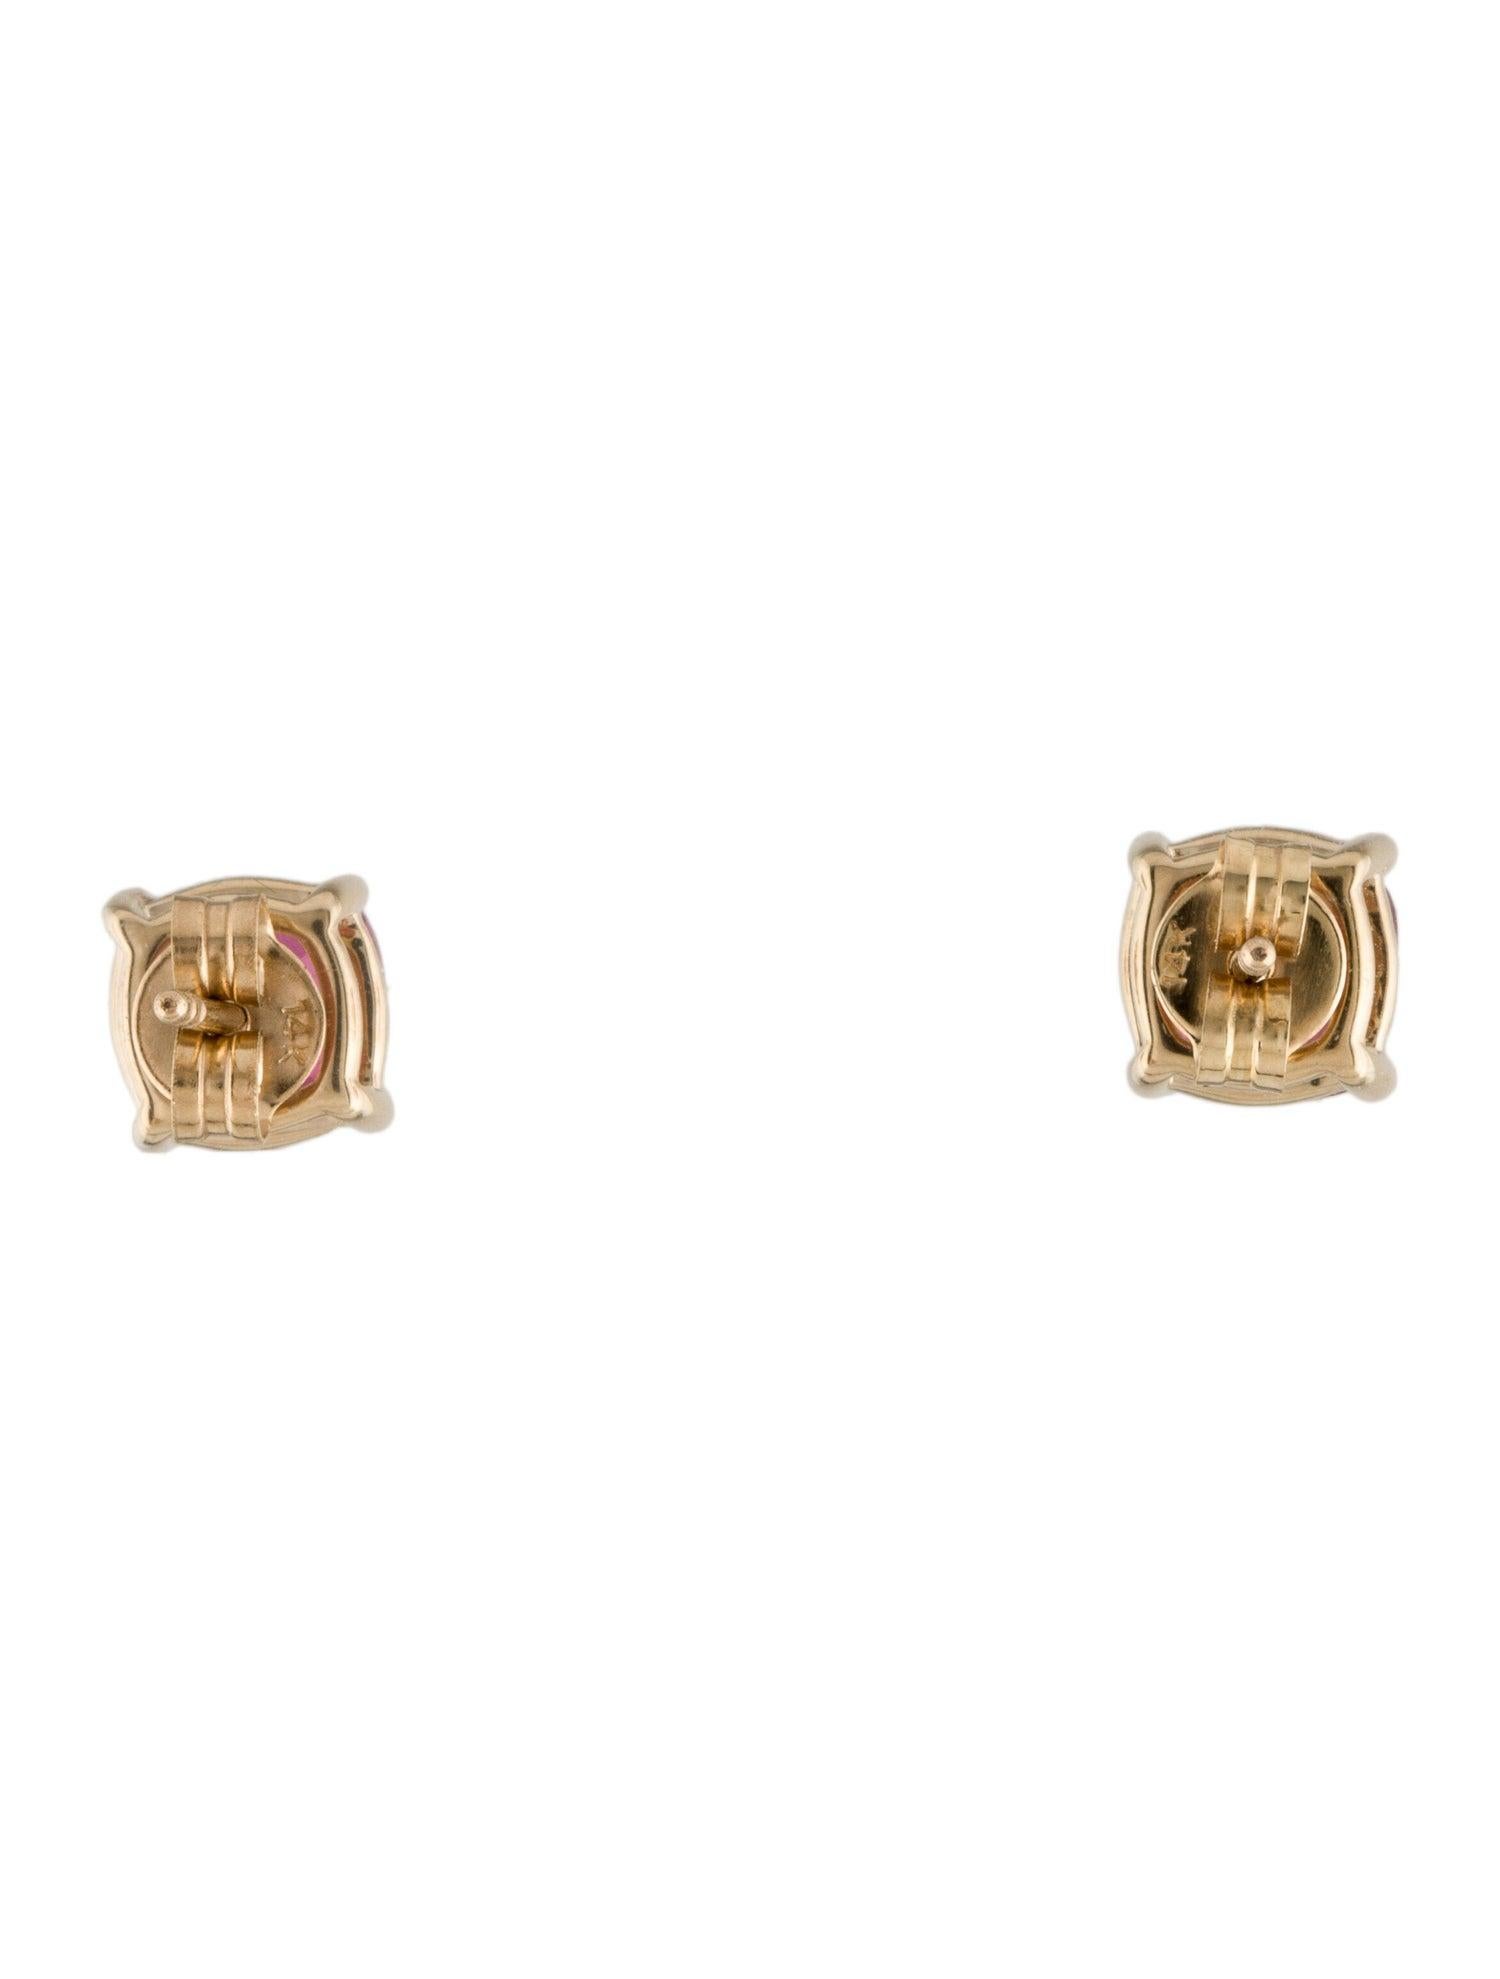 Brilliant Cut Exquisite 14K Tourmaline Stud Earrings - Stunning & Timeless Glamour Jewelry For Sale